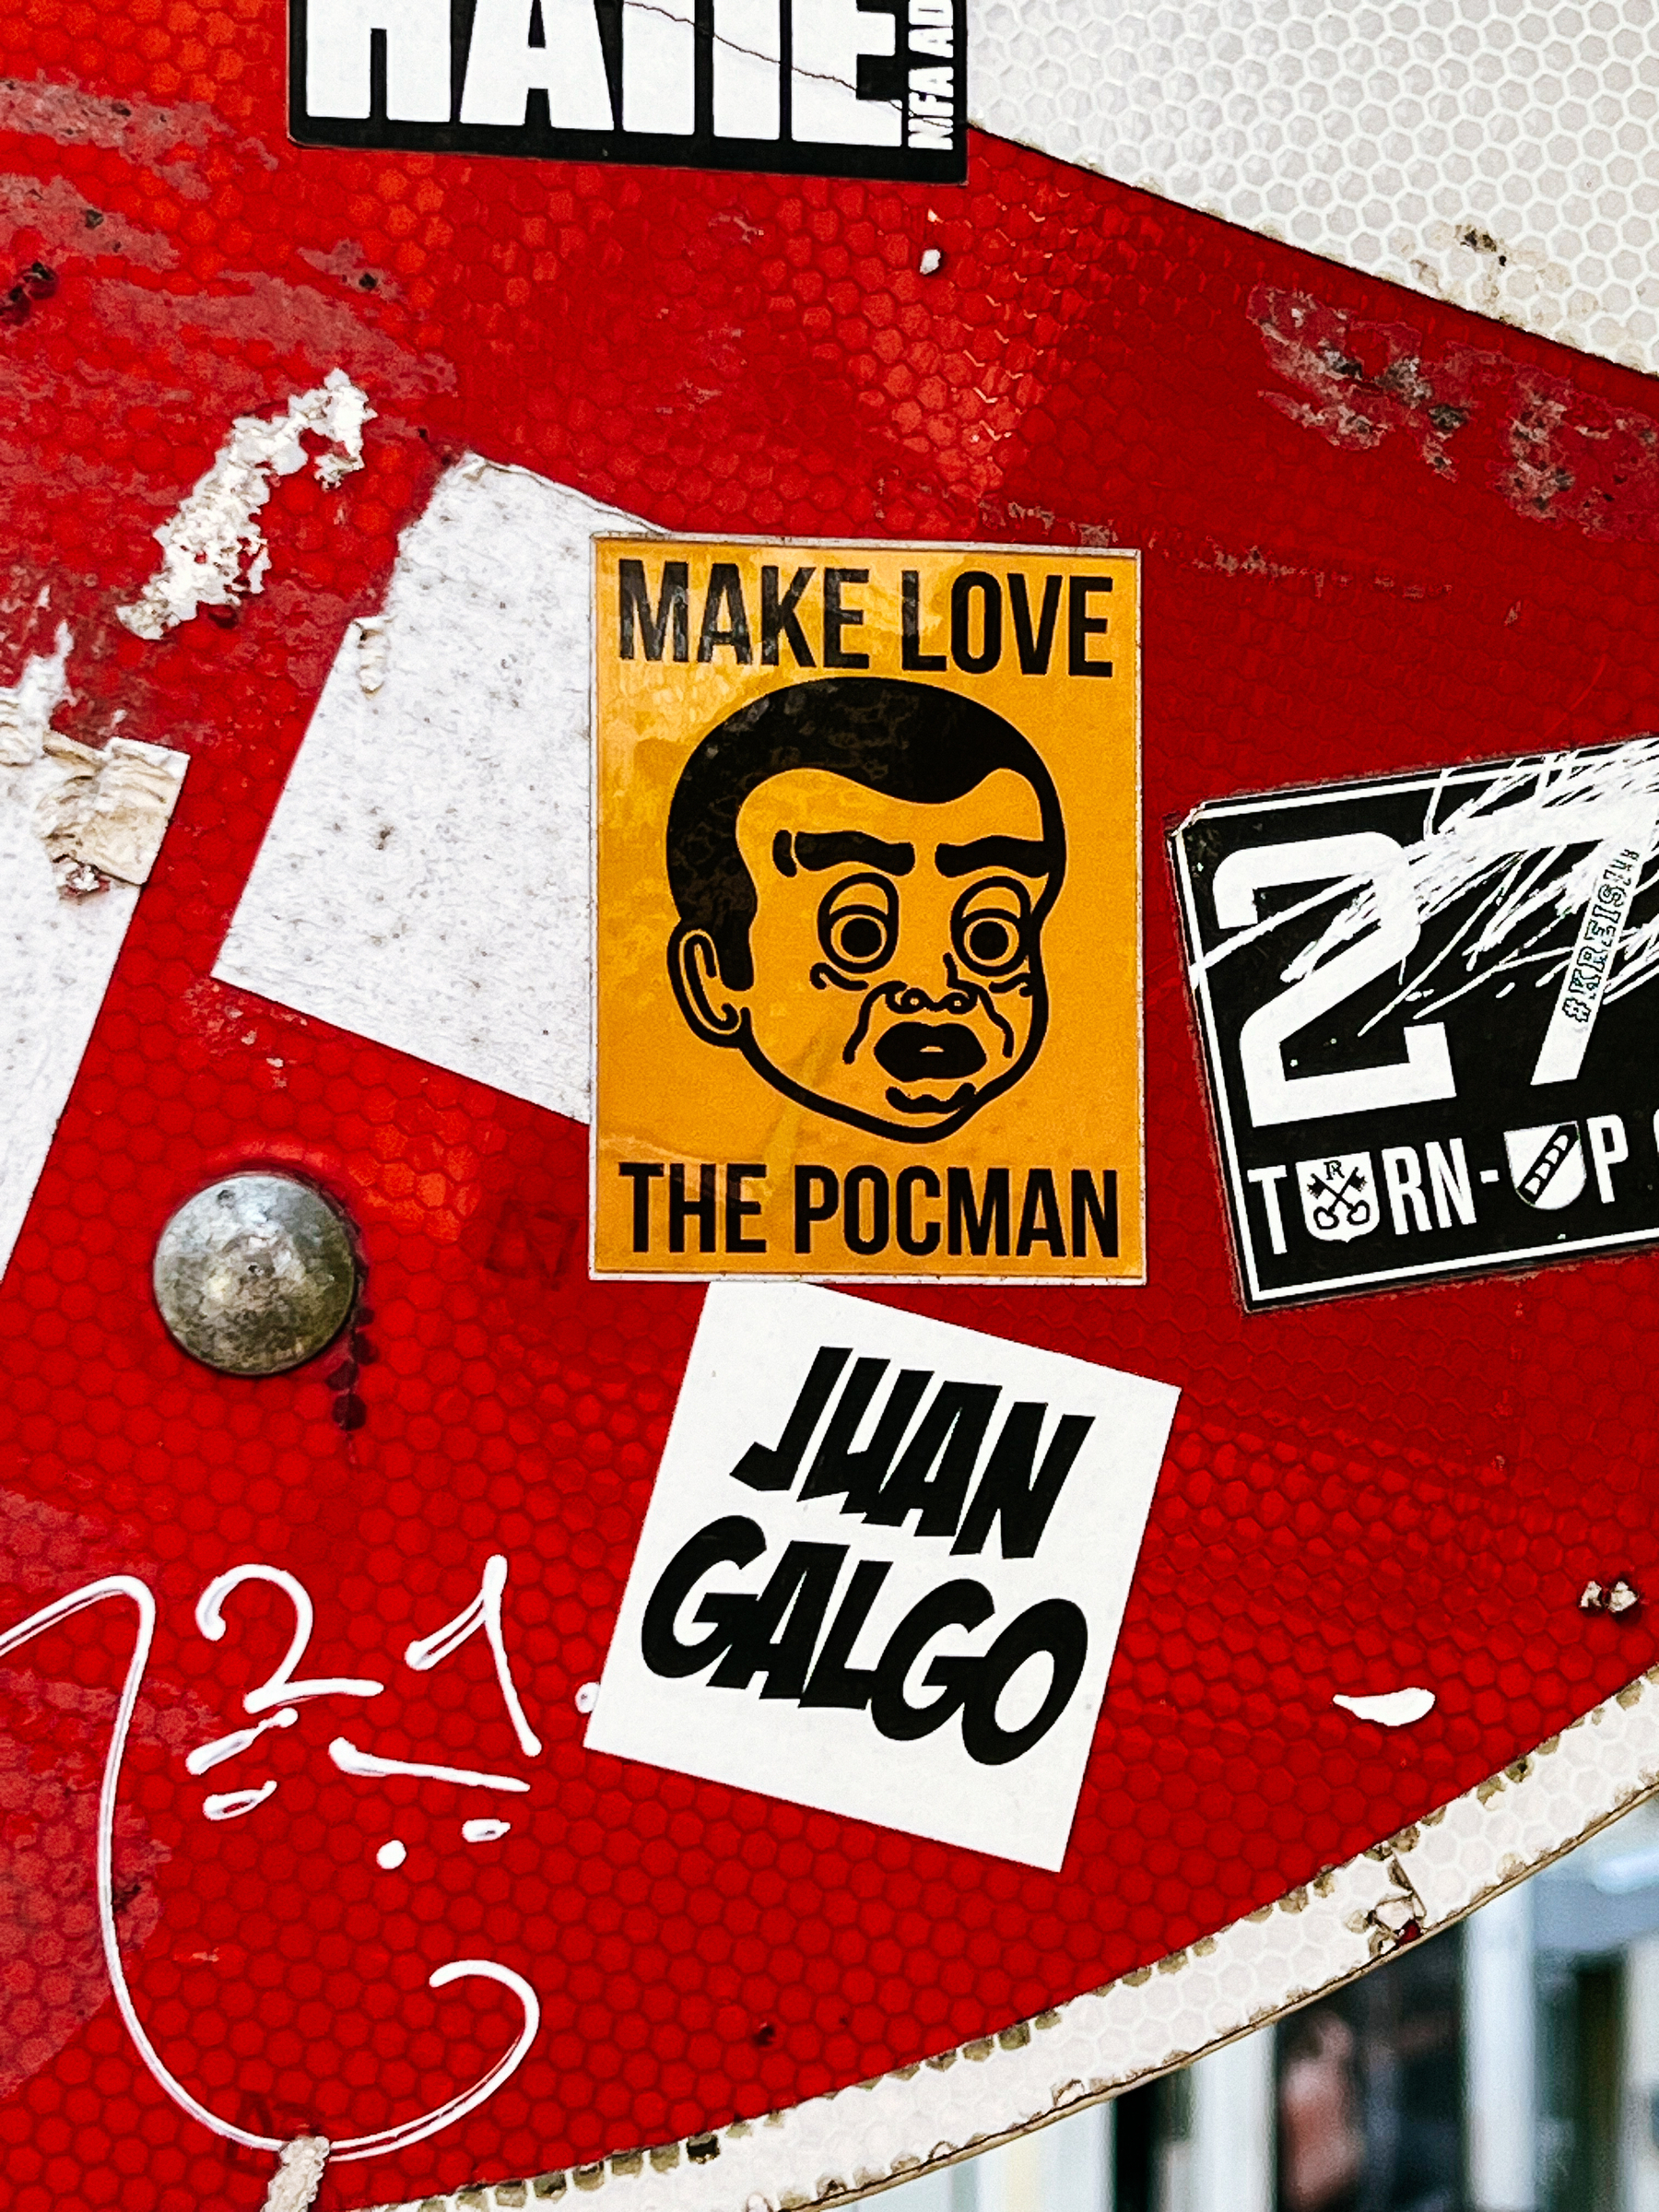 A sticker on a textured, red background reads &ldquo;MAKE LOVE / THE POCMAN&rdquo; accompanied by an illustration of a man&rsquo;s face.